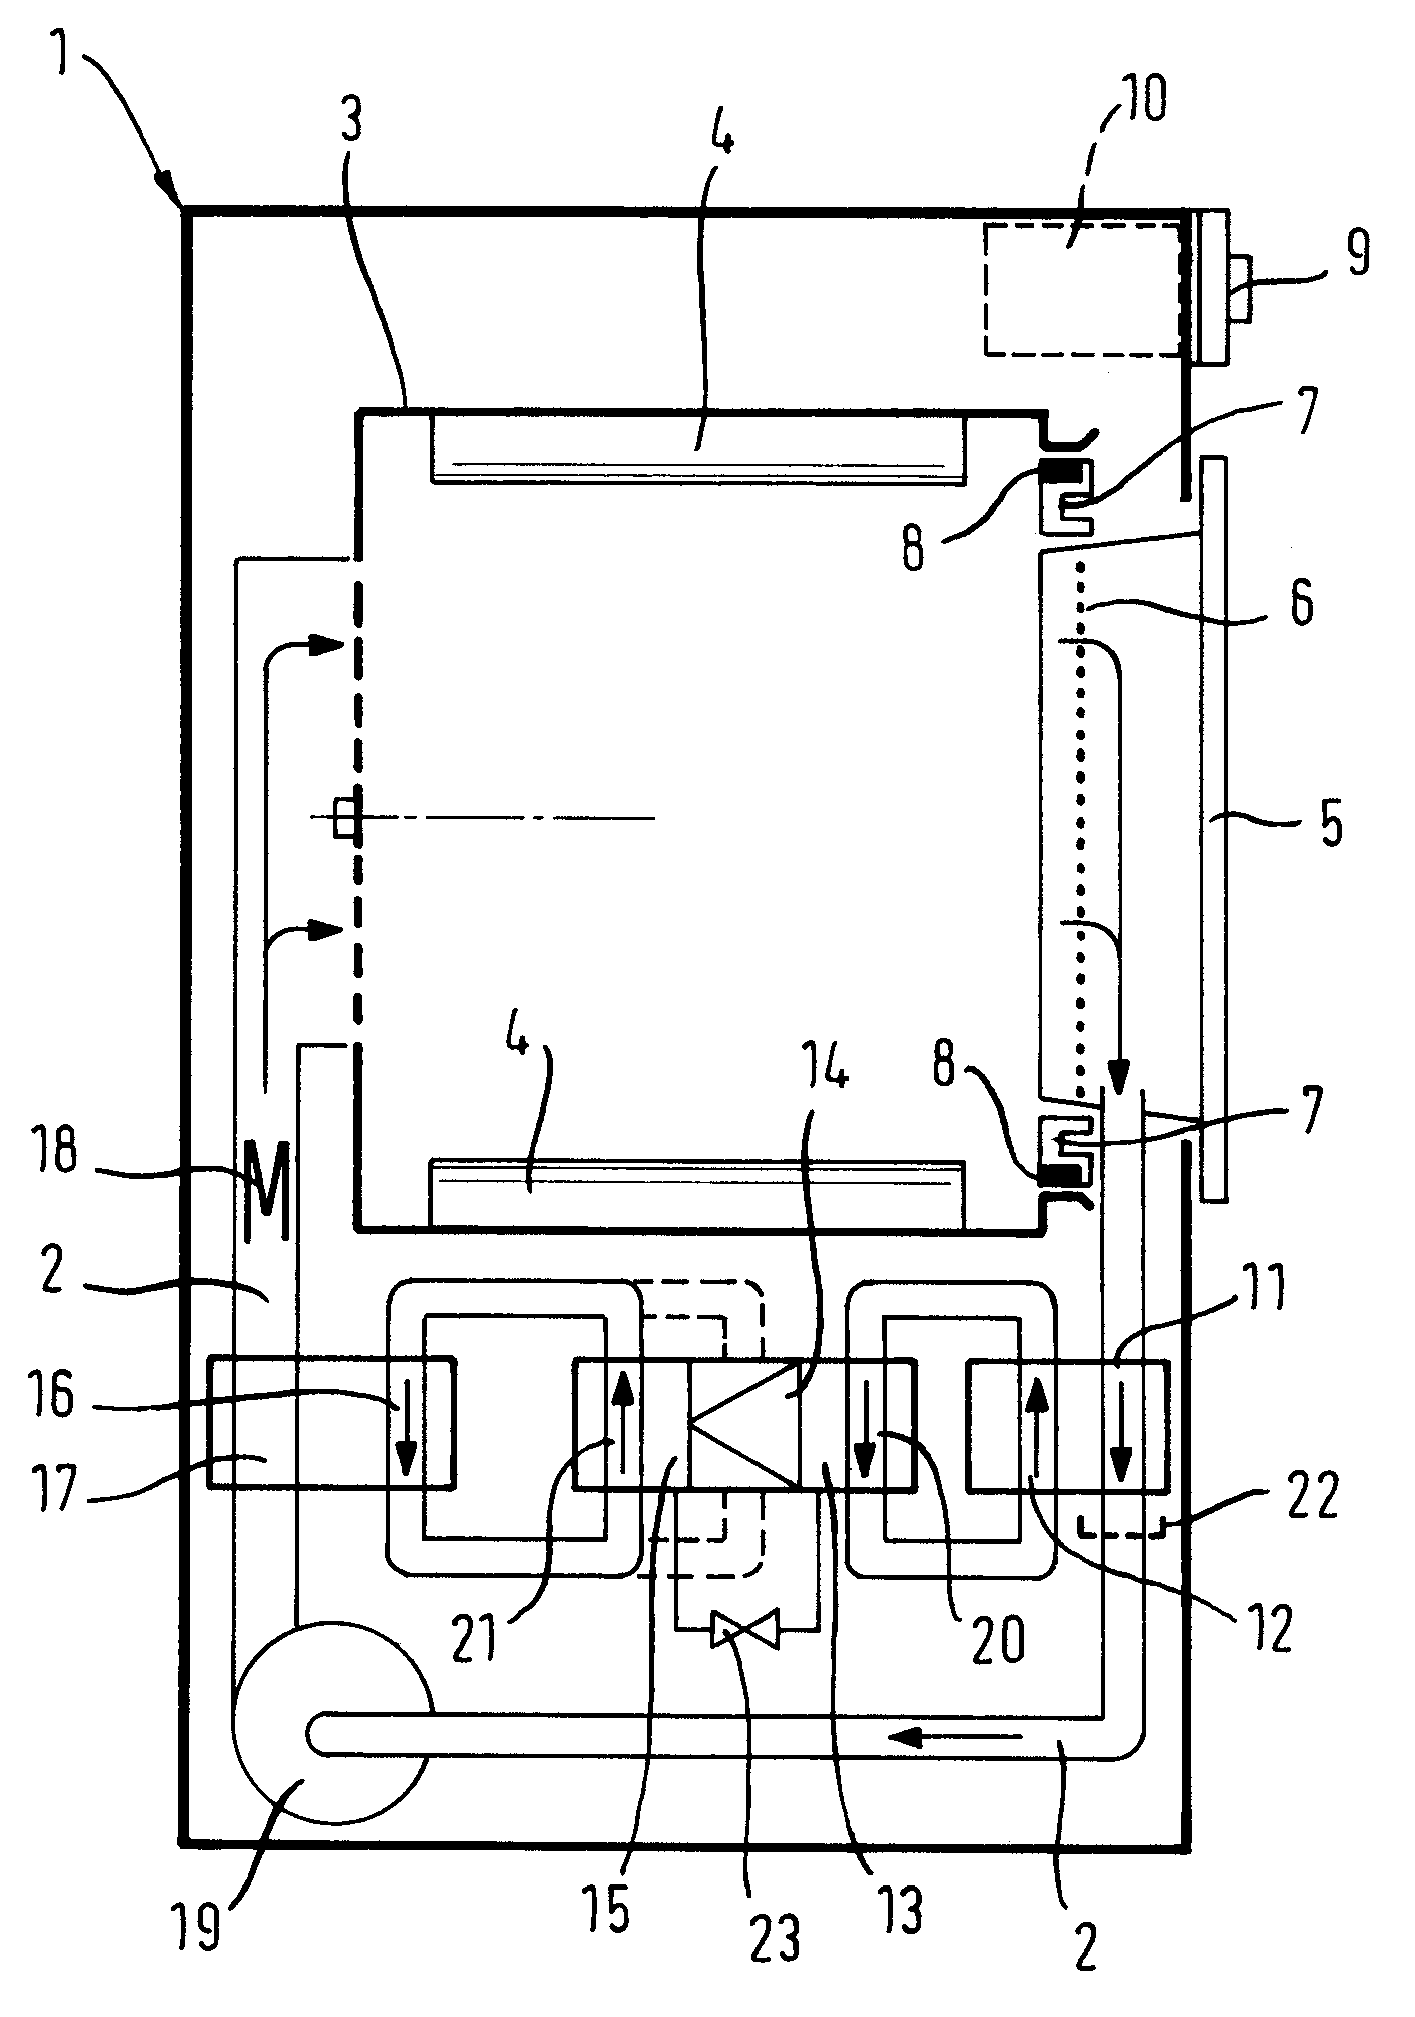 Condensation dryer having a heat pump and method for the operation thereof